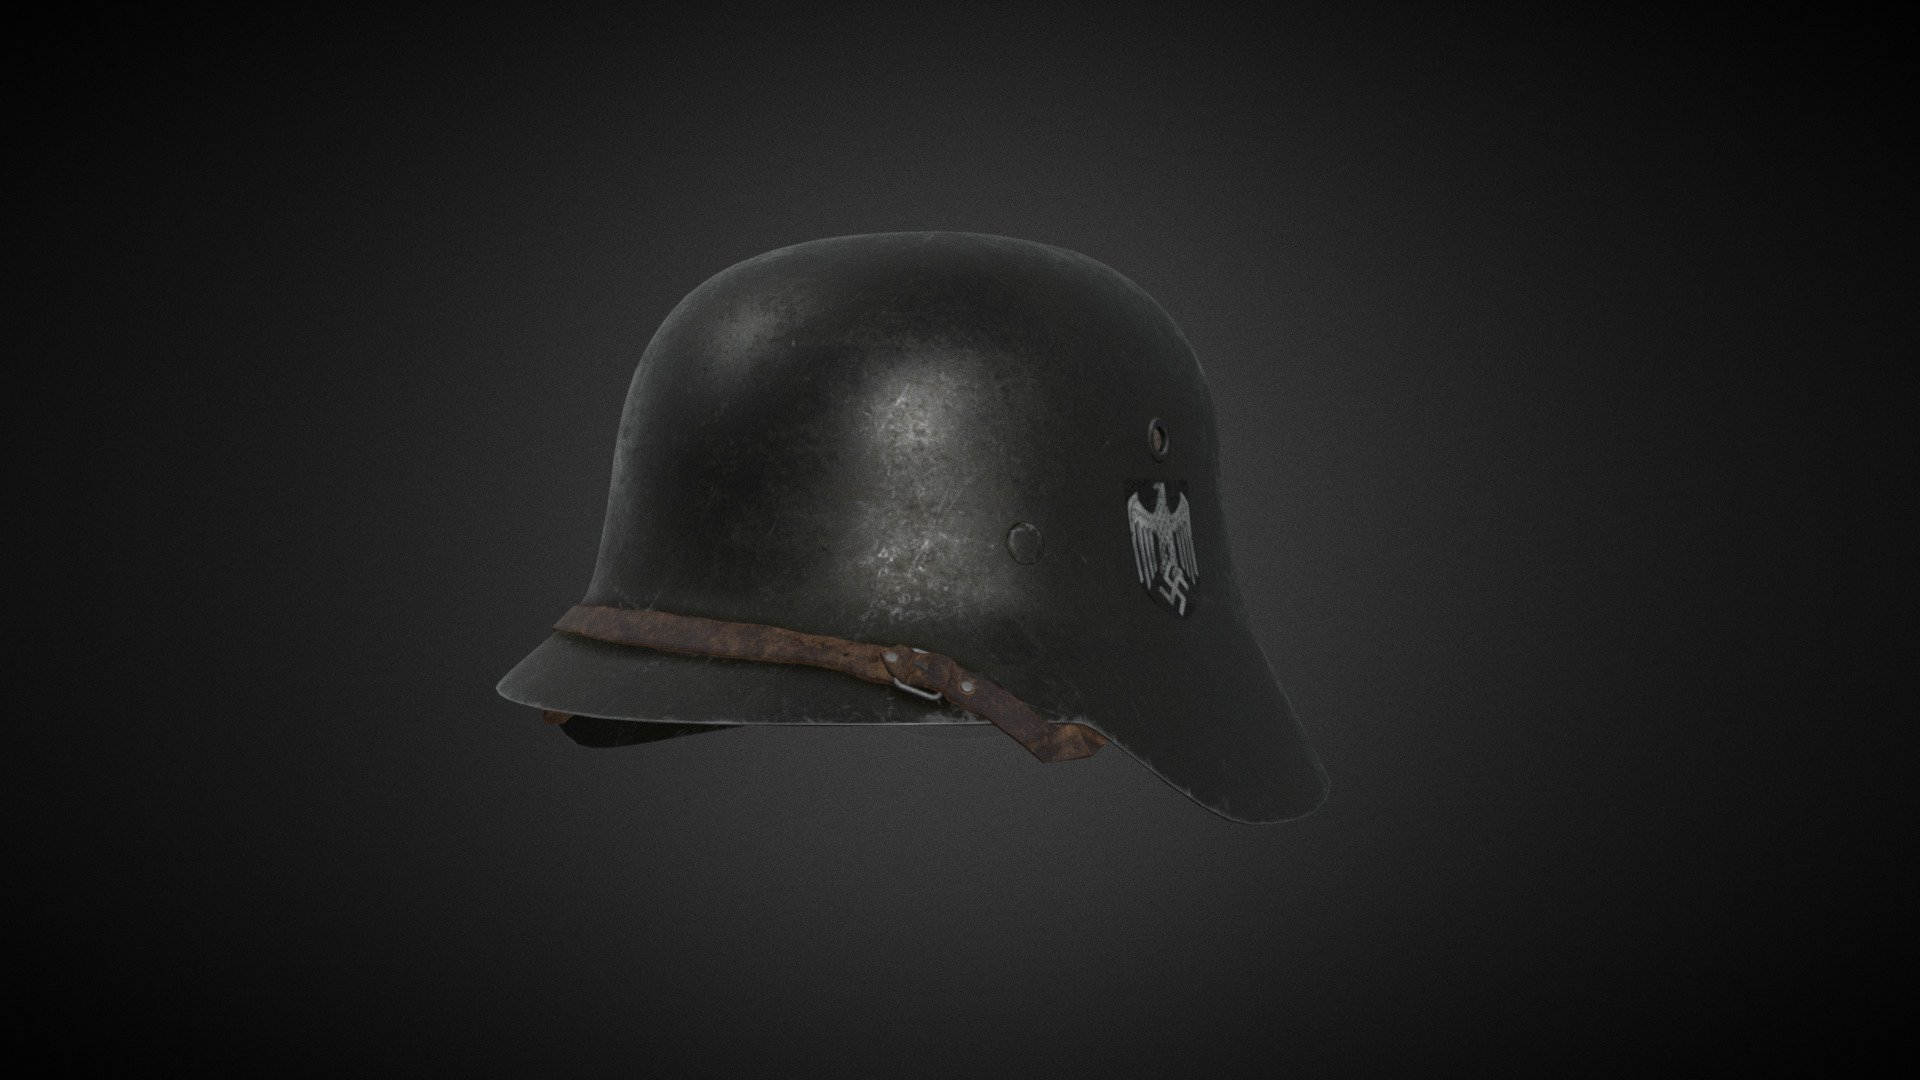 M35 on Artstation

The Stahlhelm (&lsquo;steel helmet') is a German military steel combat helmet intended to provide protection against shrapnel and fragments of grenades. The term Stahlhelm refers both to a generic steel helmet and more specifically to the distinctive German military design.

In 1934 tests began on an improved Stahlhelm, whose design was a development of World War I models. The Eisenhüttenwerke company of Thale carried out prototype design and testing, with Dr Friedrich Schwerd once again taking a hand.

Liner system used in M35, M40 and M42 Stahlhelmen
More than 1 million M1935 helmets were manufactured in the first two years after its introduction, and millions more were produced until 1940 when the basic design and production methods were changed 3d model